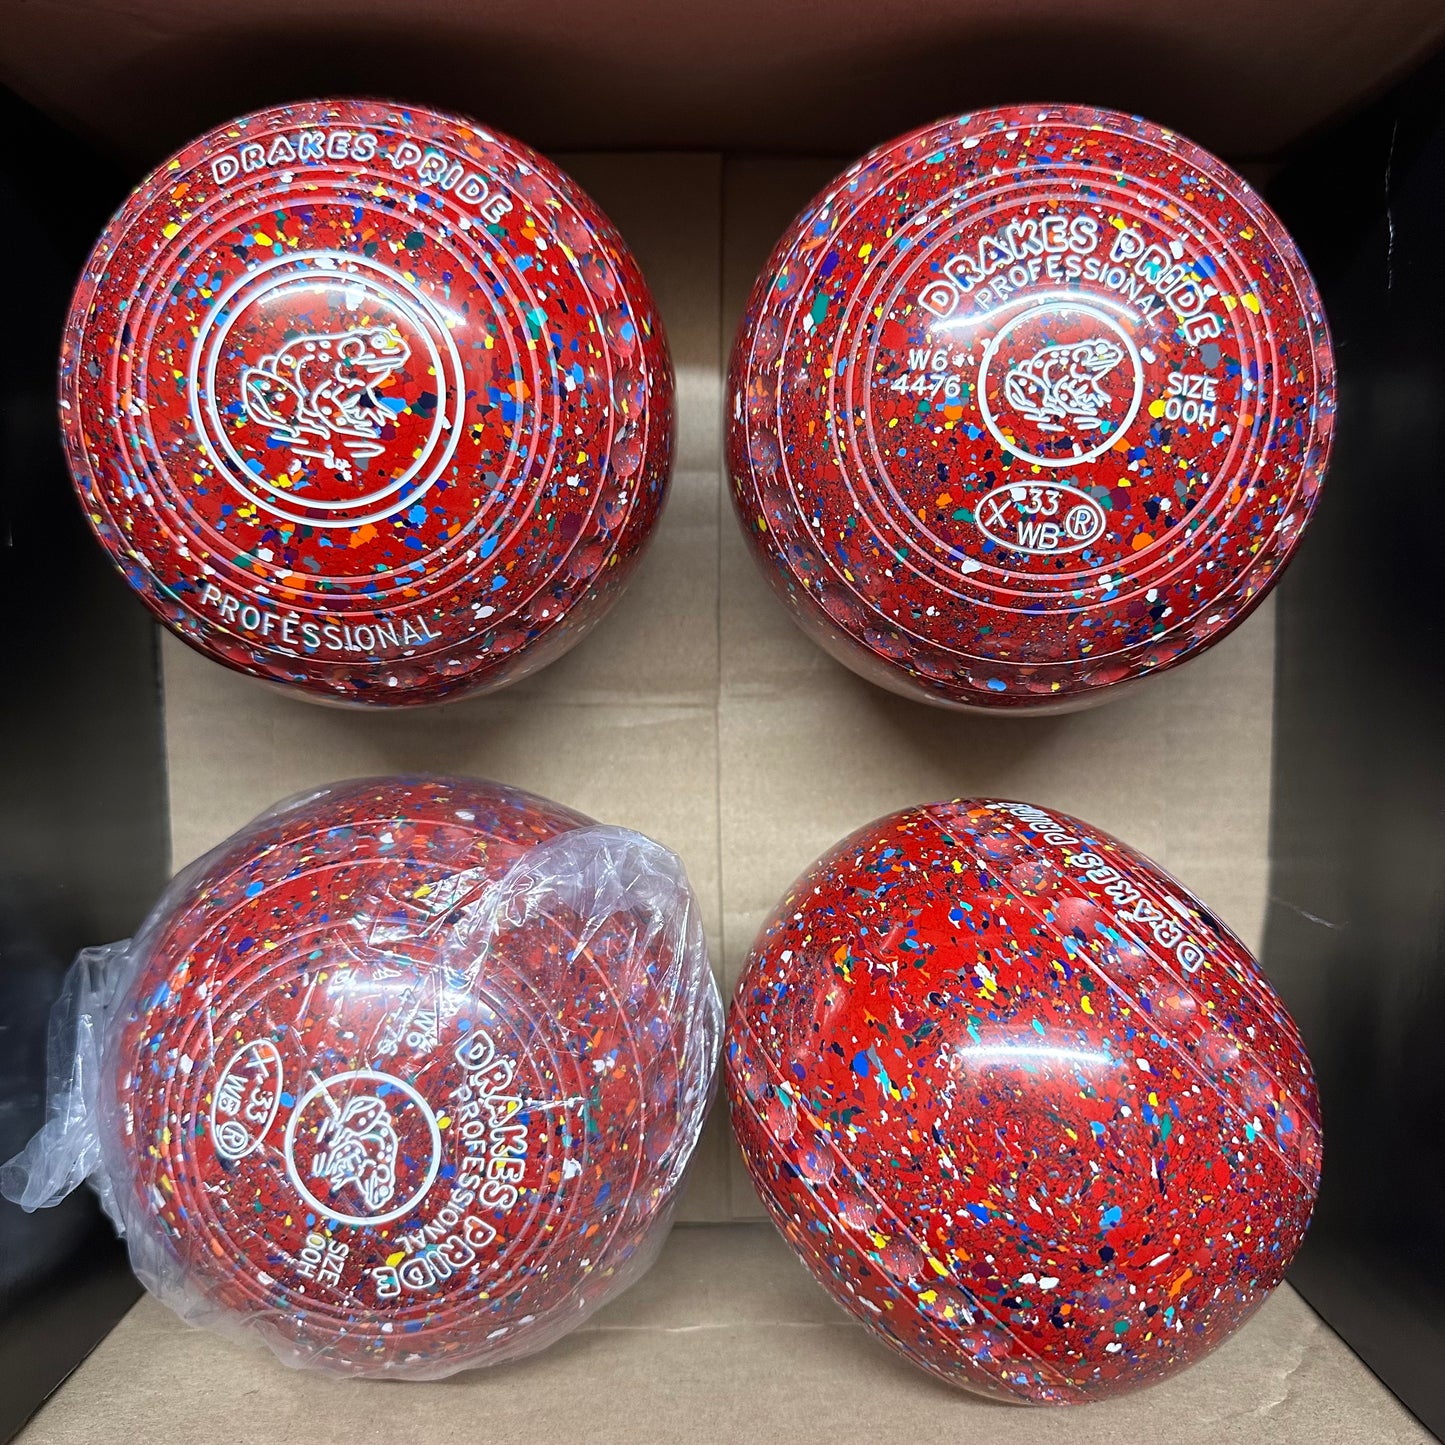 Drakes Pride Professional - Size 00H - Red Harlequin (White Rings) - WB33 Stamp